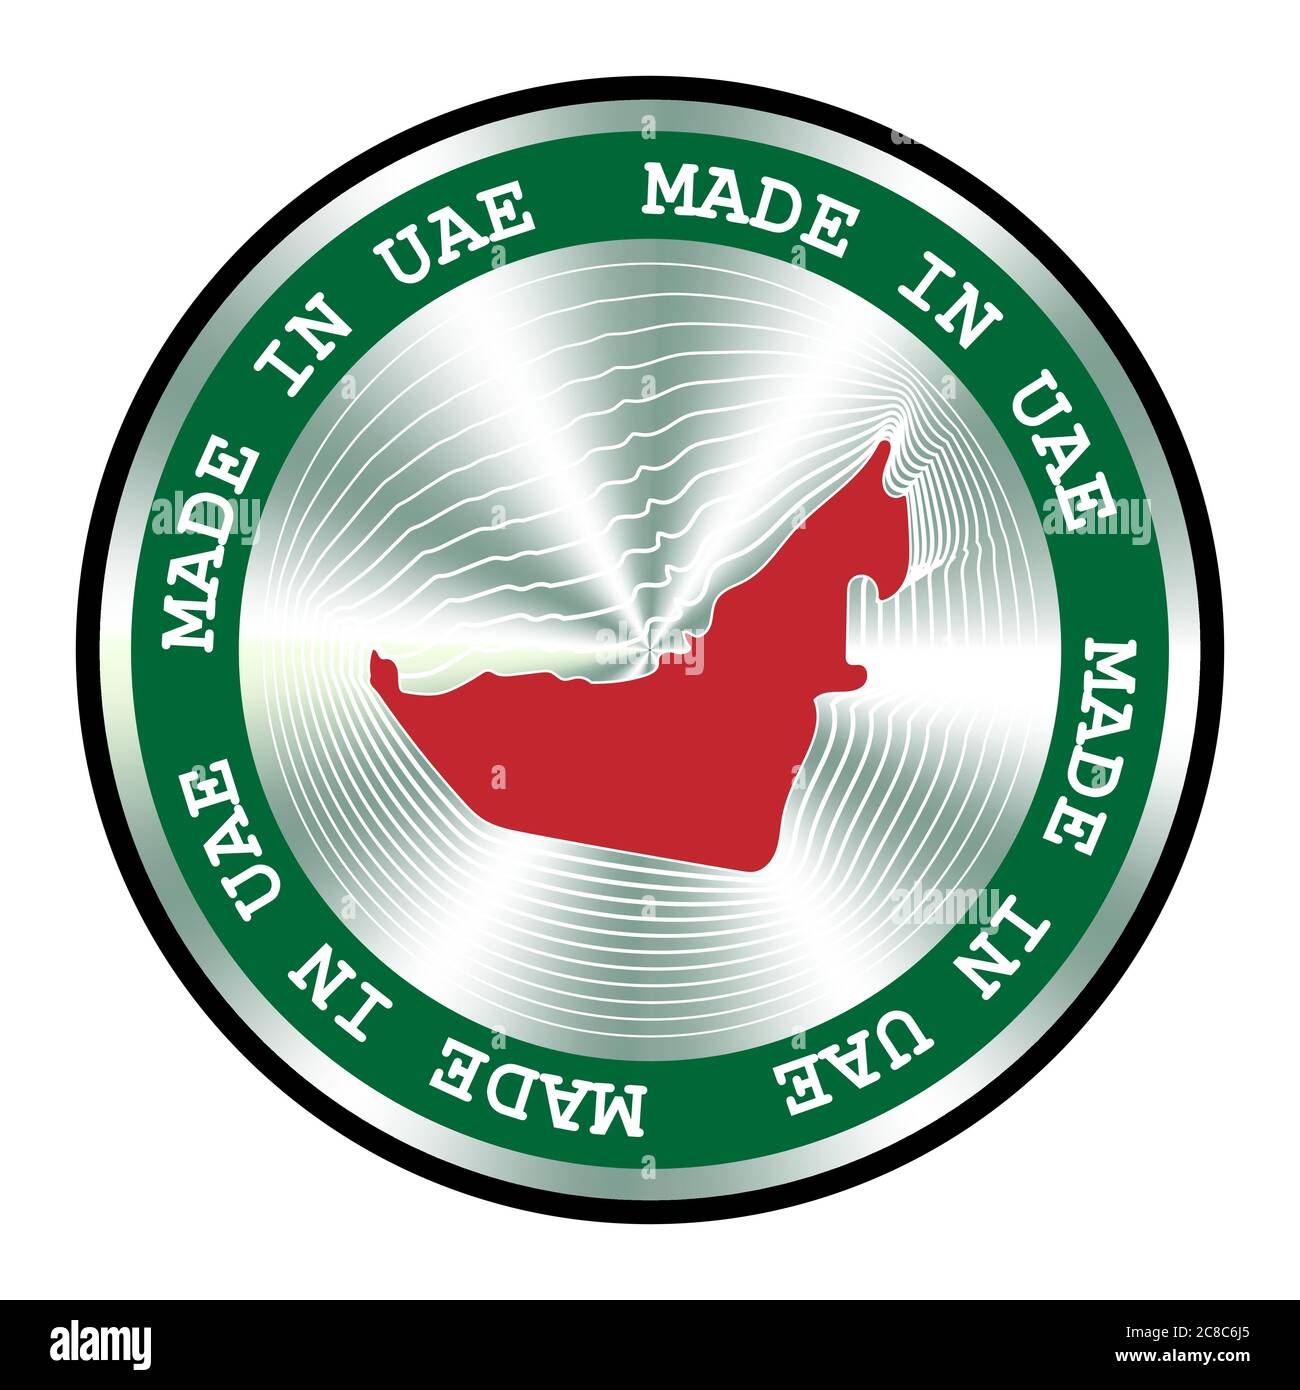 Made in UAE seal or stamp. Round hologram sign for label design and united arab emirates national marketing Stock Vector